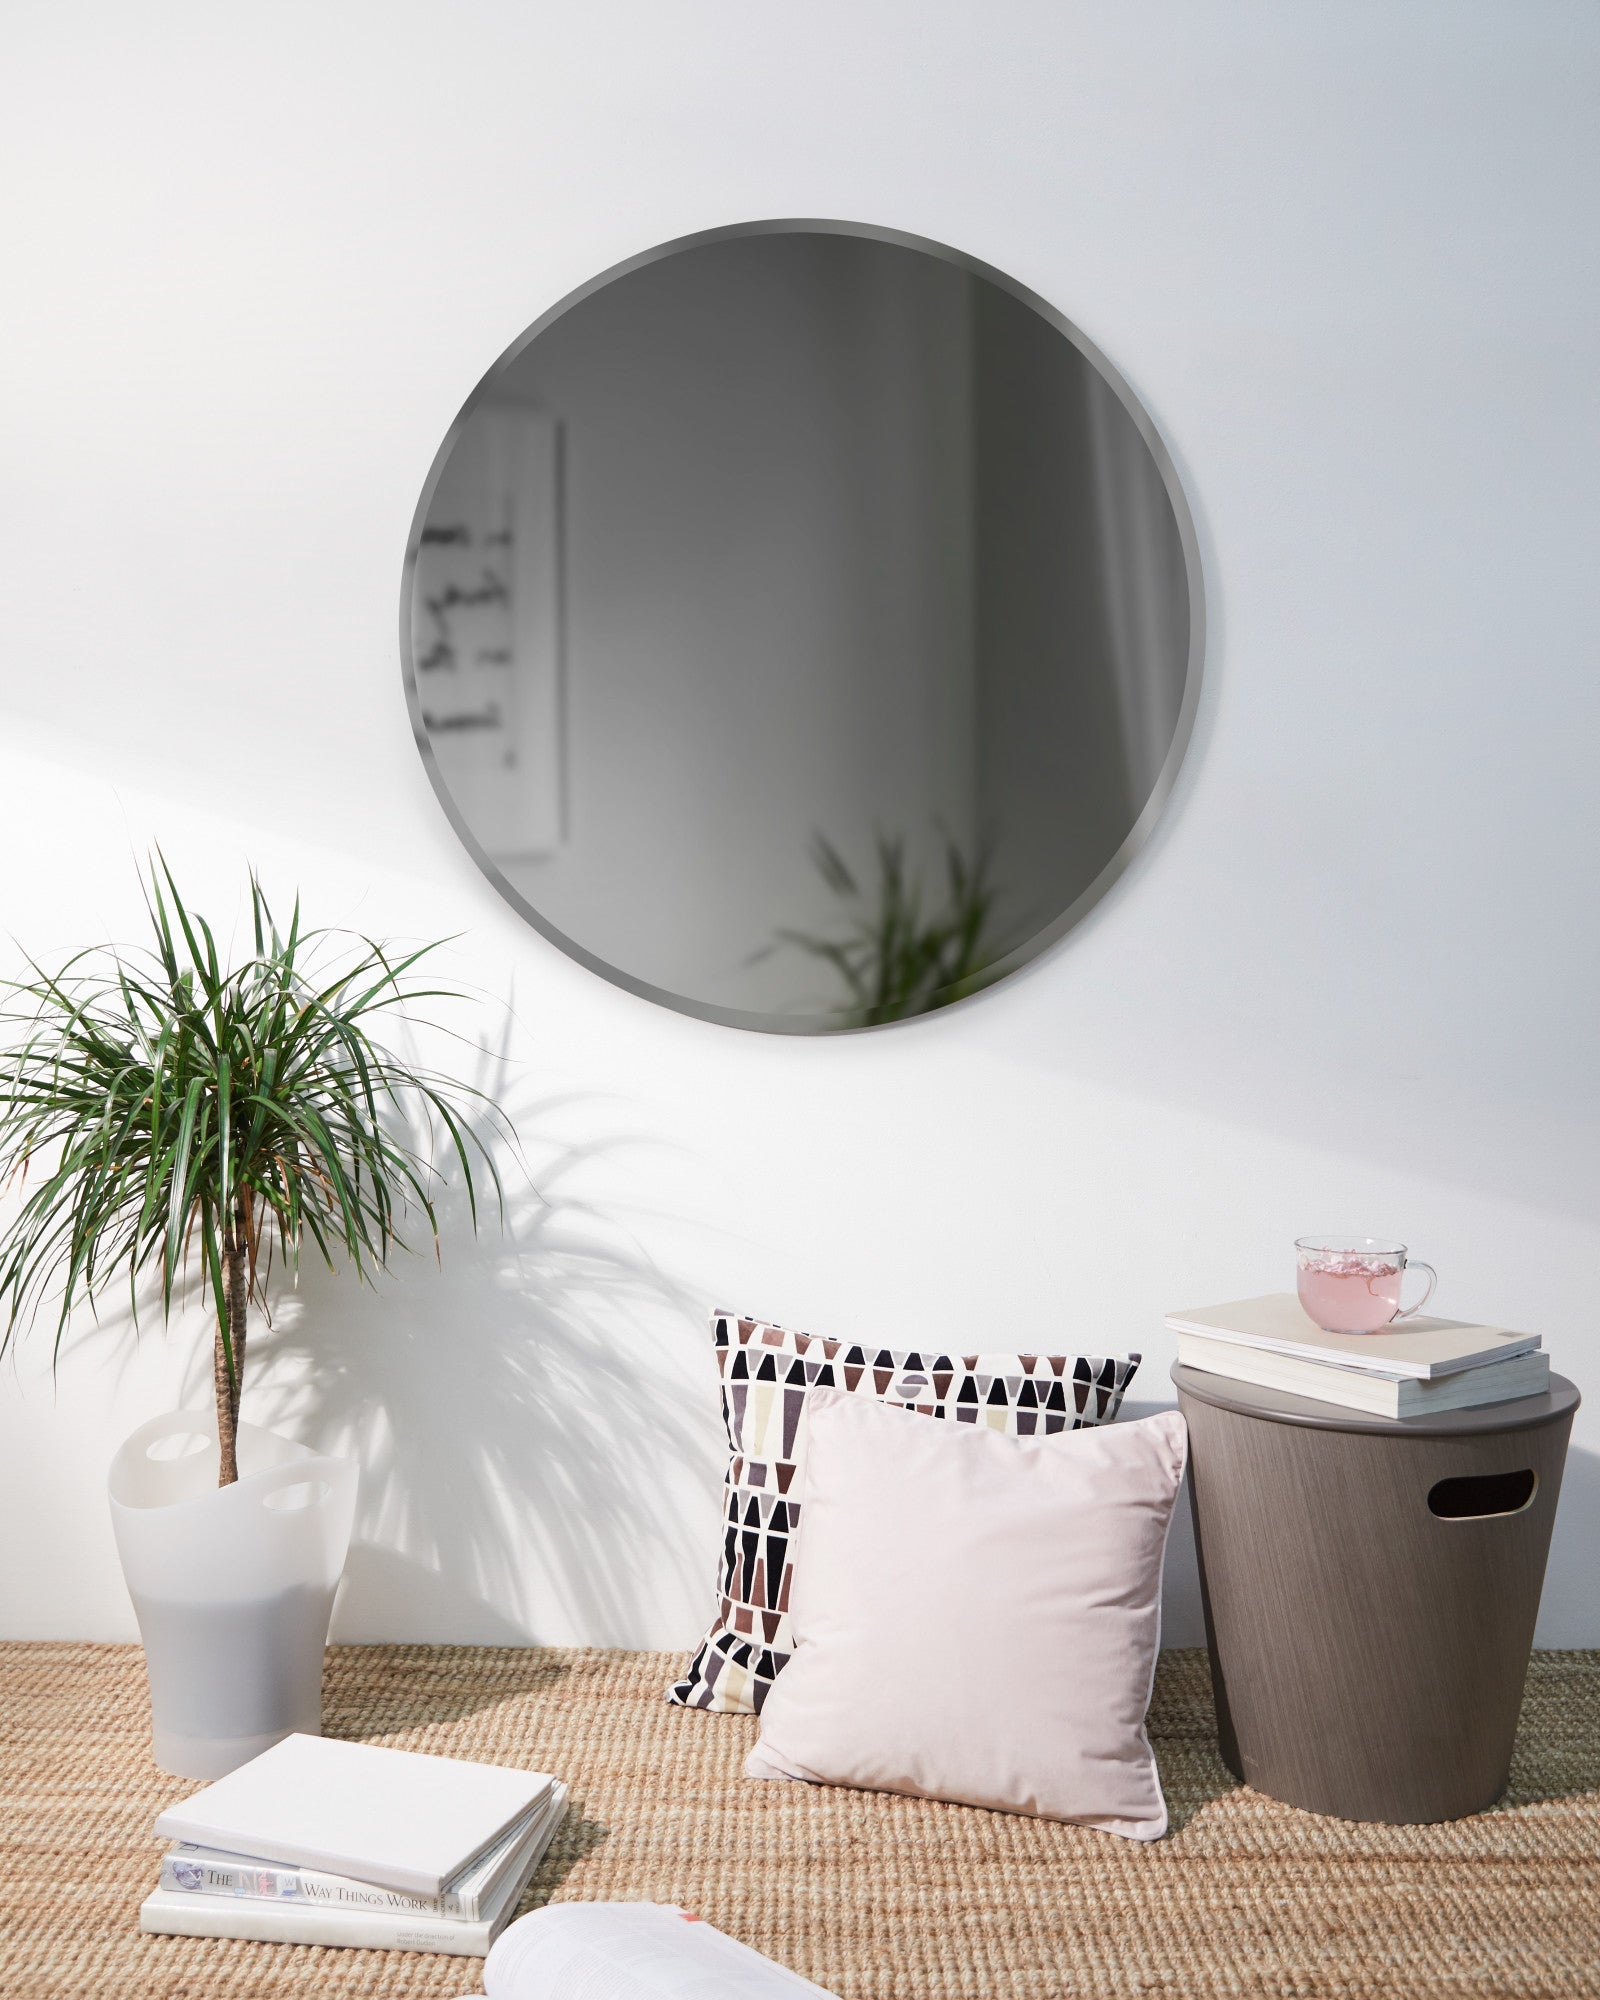 Wall Mirrors | color: Smoke | size: 37"""" (94 cm) | Hover